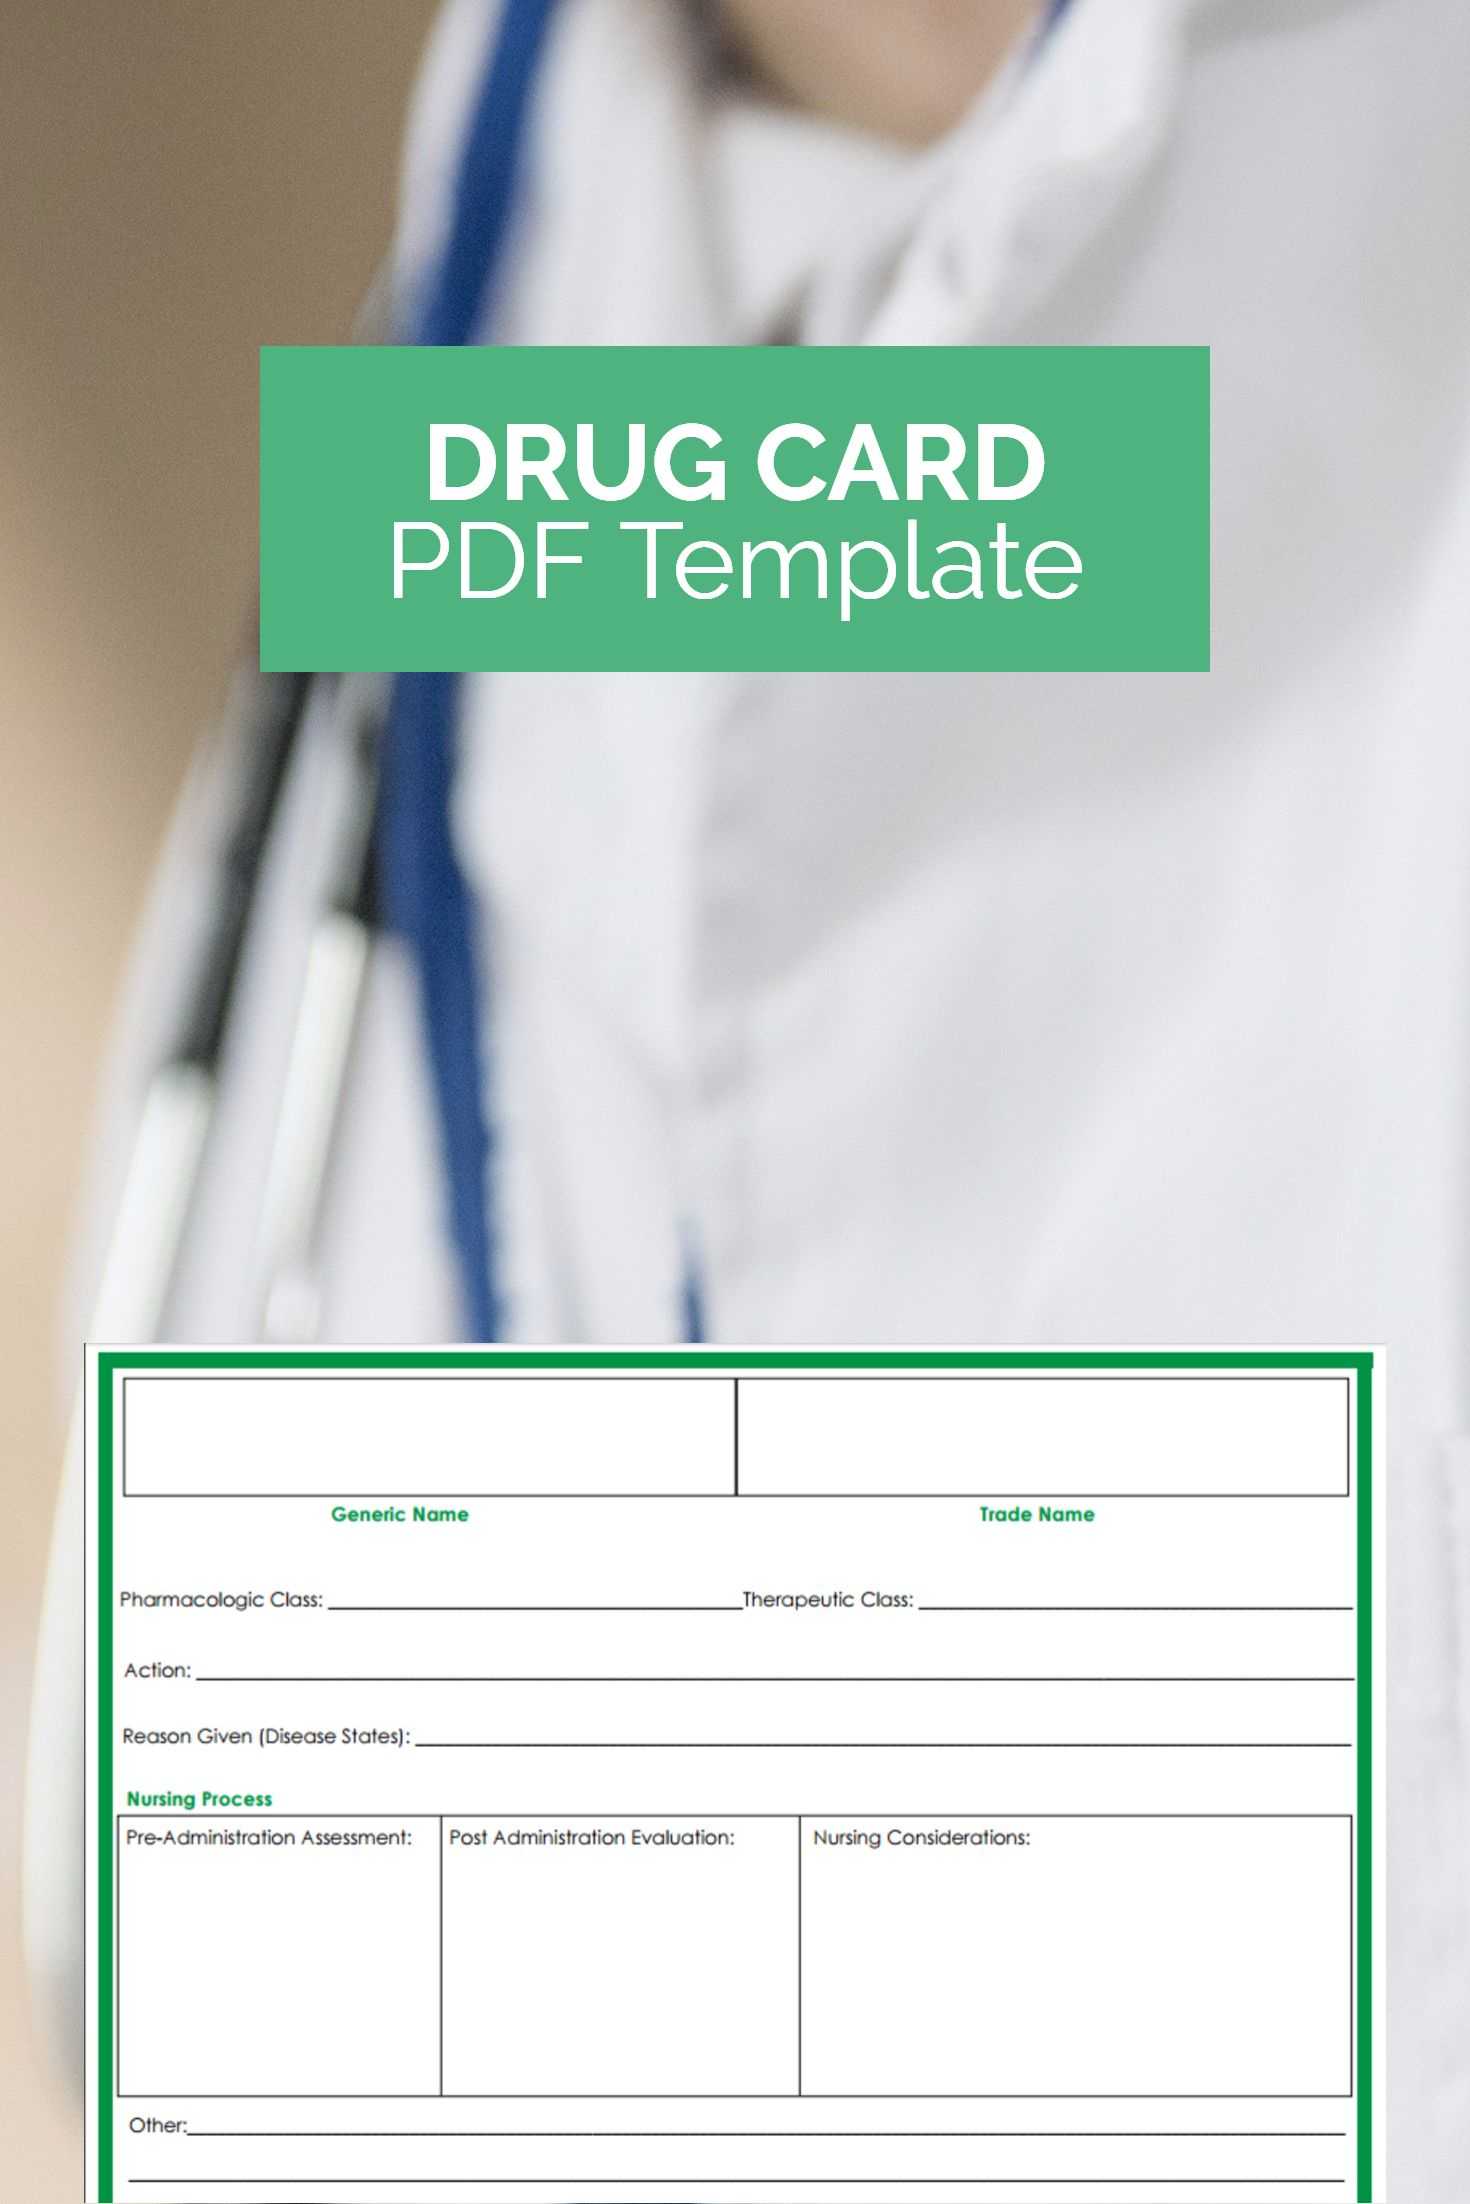 want-a-free-drug-card-template-that-can-make-studying-much-regarding-med-cards-template